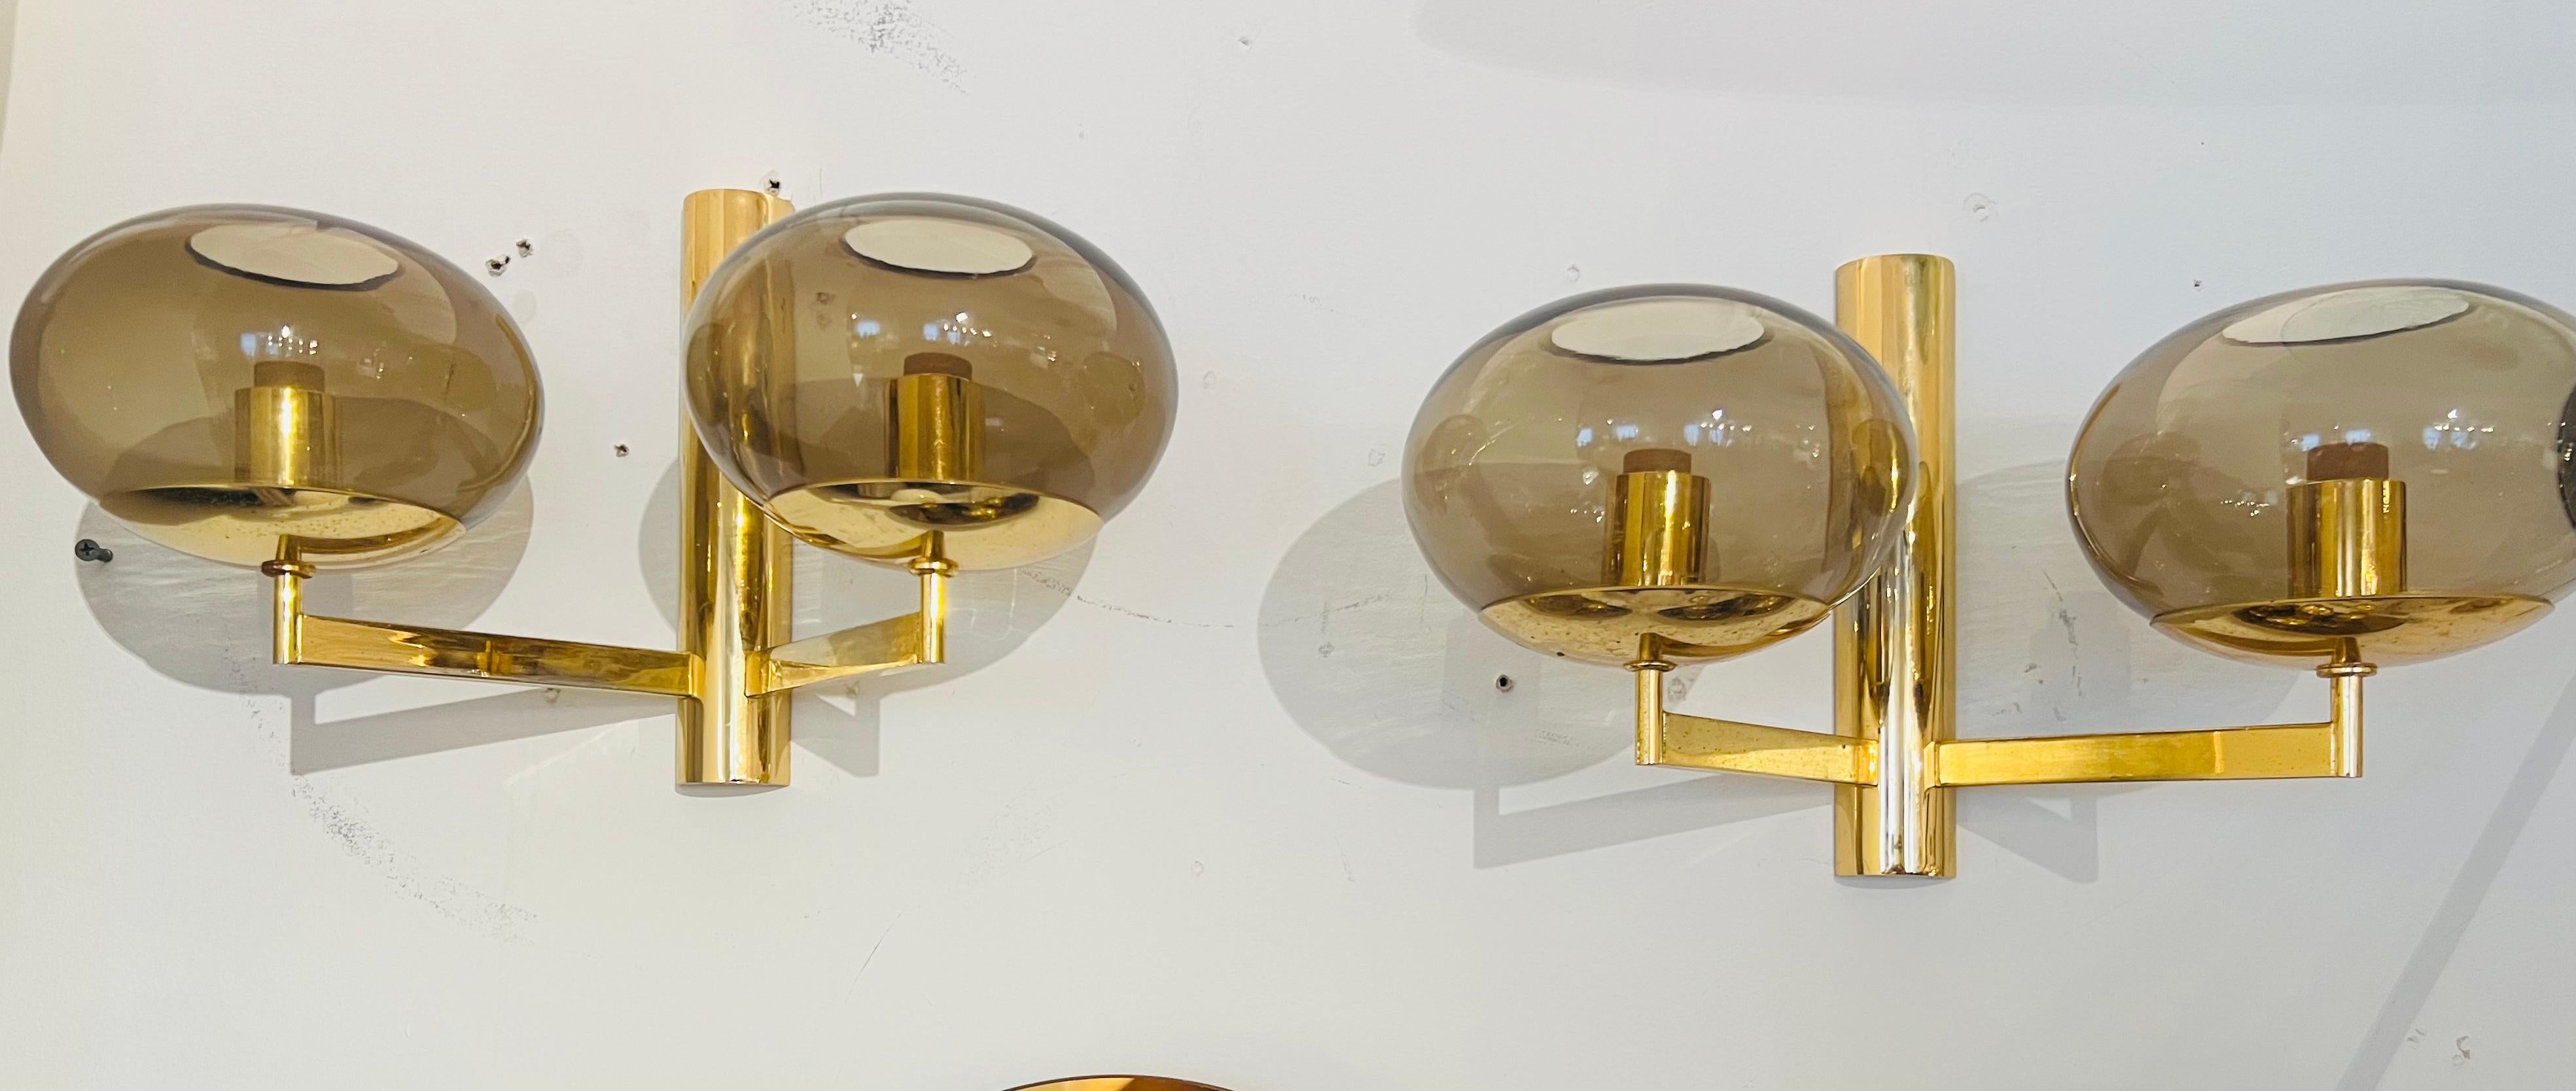 A pair of golden brass double light wall lamps with smoked glass globe shades by the famed Italian lamp maker, Sciolari. Rewired.